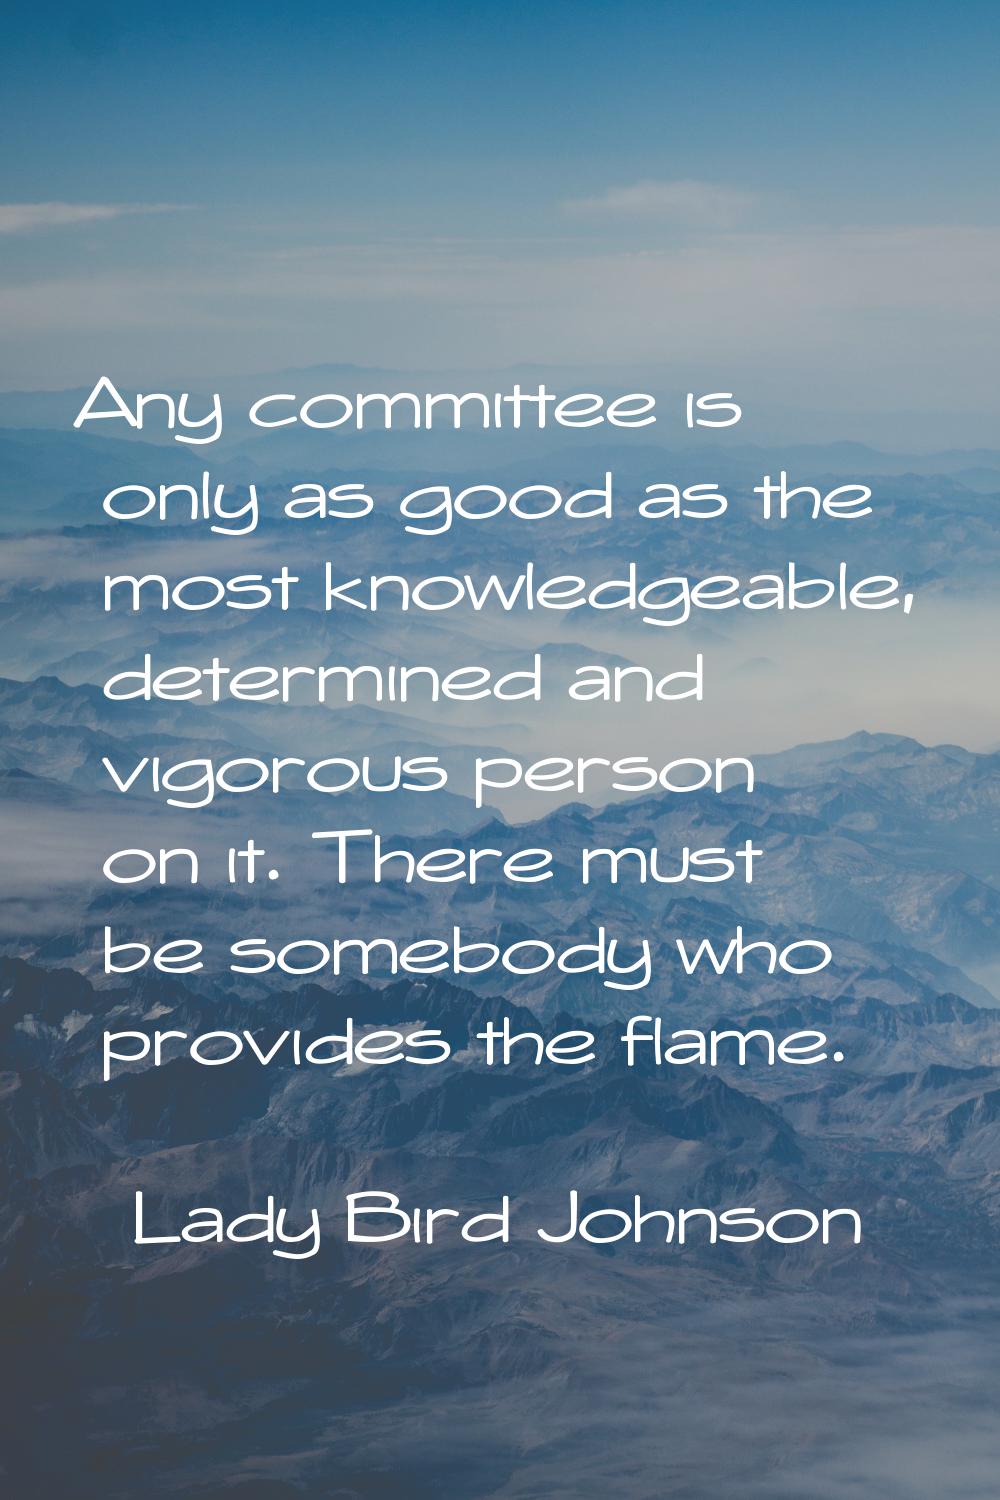 Any committee is only as good as the most knowledgeable, determined and vigorous person on it. Ther